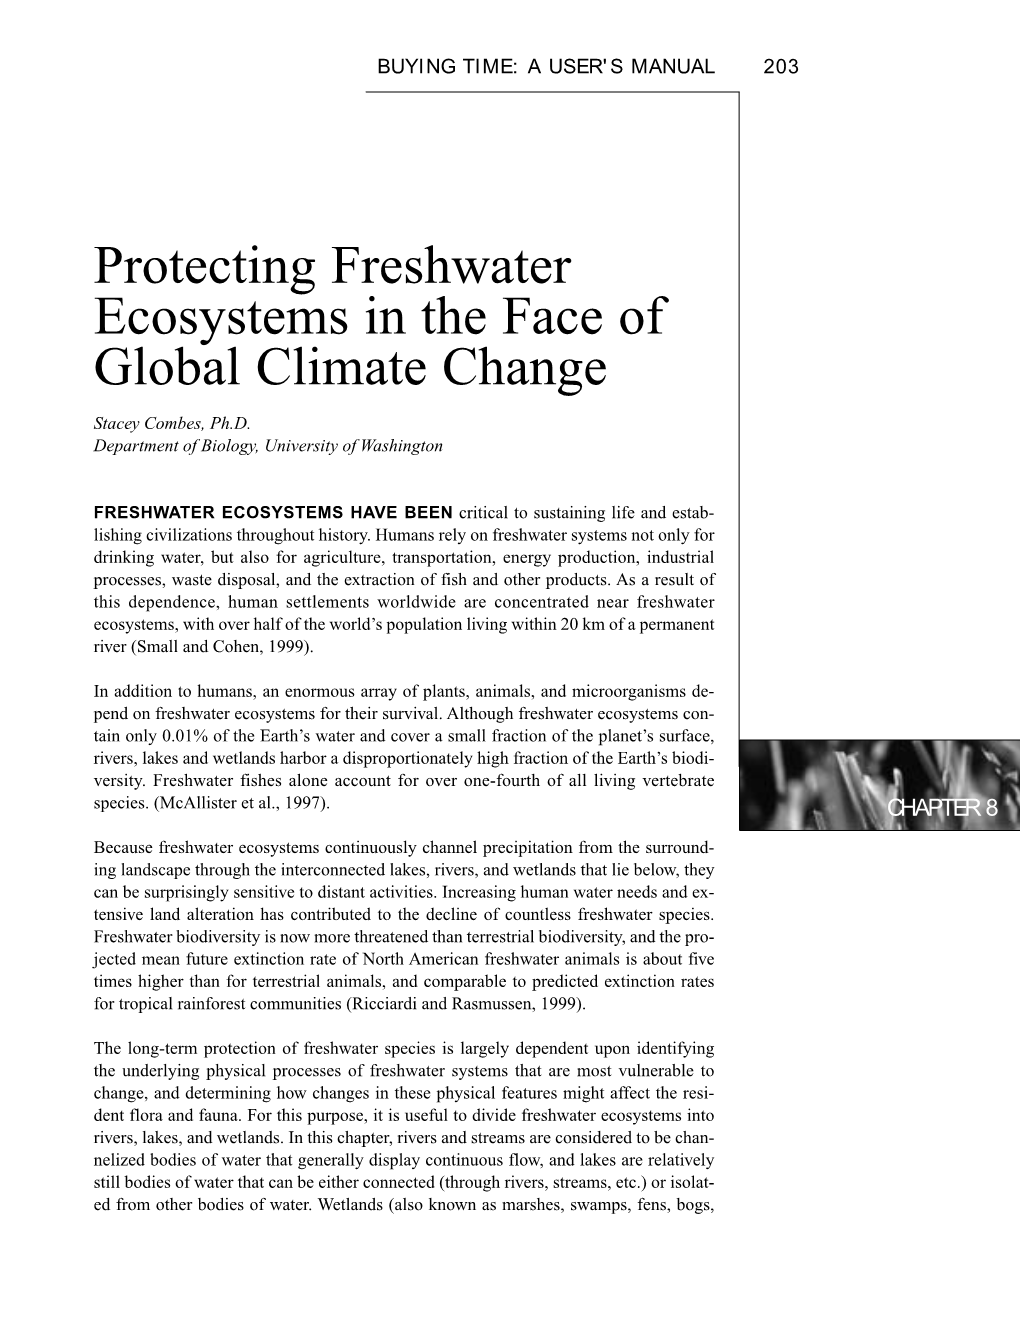 Protecting Freshwater Ecosystems in the Face of Global Climate Change